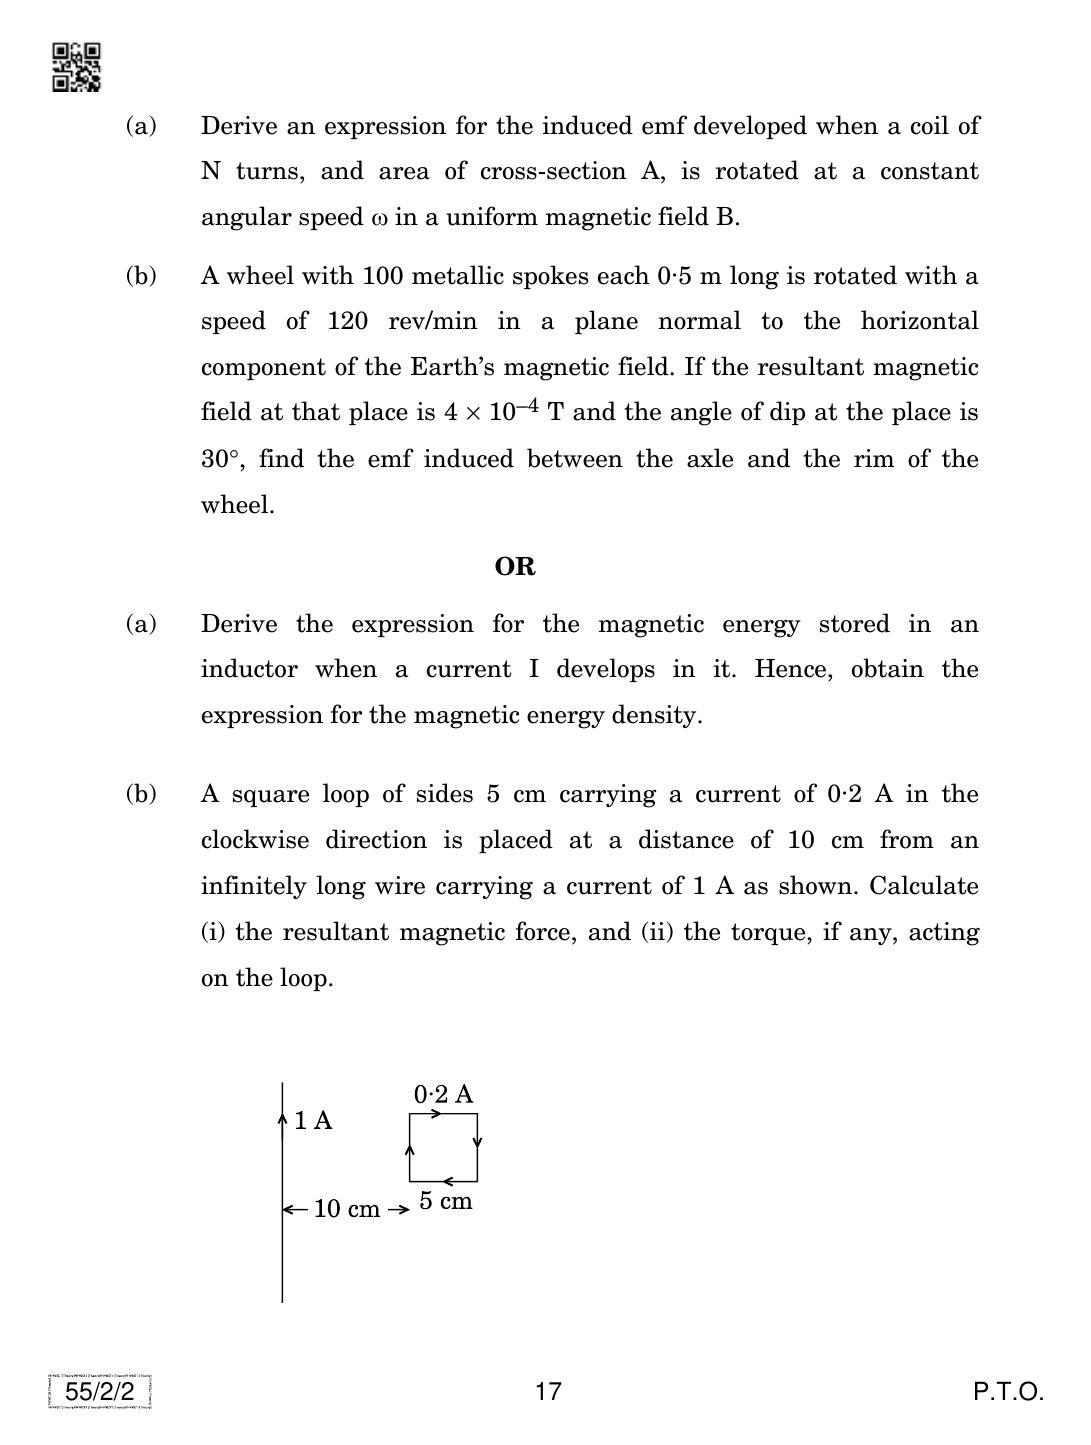 CBSE Class 12 55-2-2 Physics 2019 Question Paper - Page 17